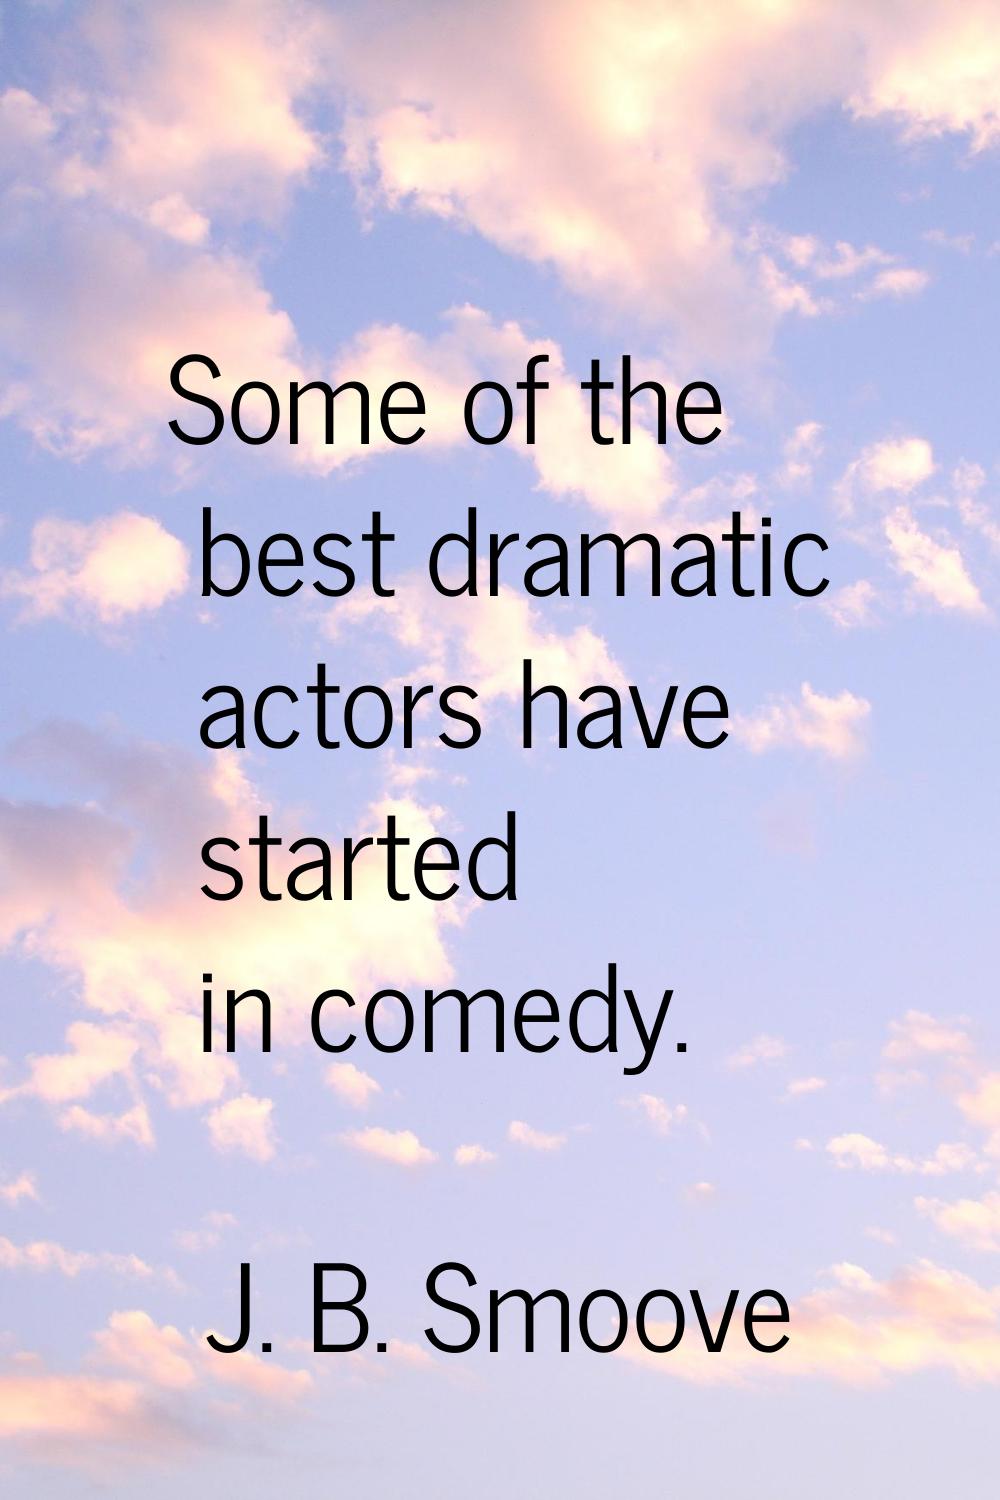 Some of the best dramatic actors have started in comedy.